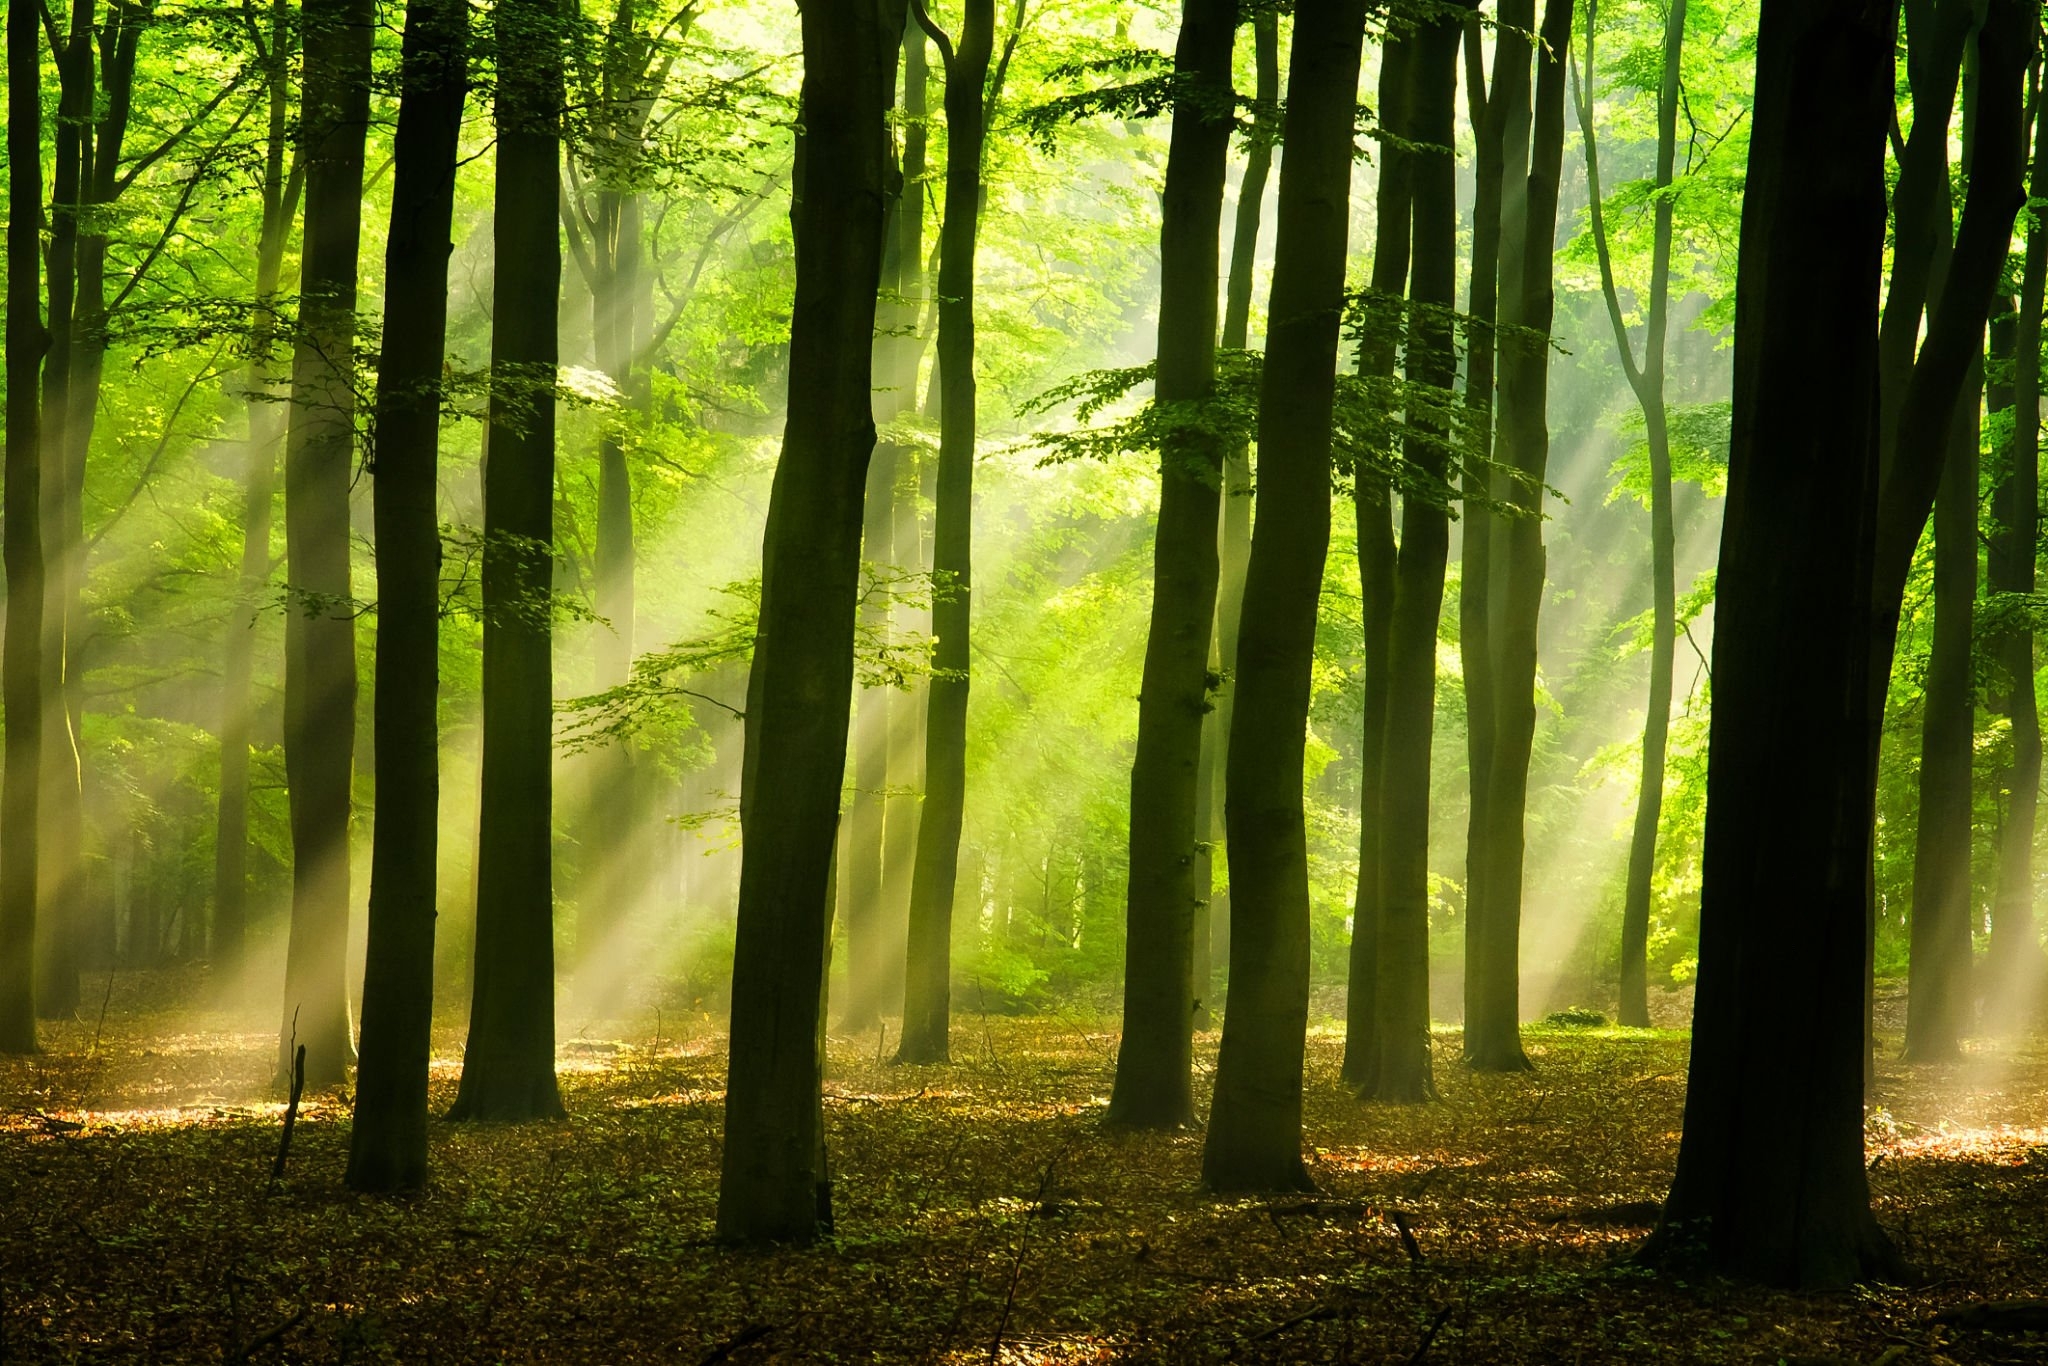 Sunlight filtering through the trees in a serene forest, illustrating the practice of Shinrin-Yoku or forest bathing, which promotes mental and physical well-being through immersion in nature.